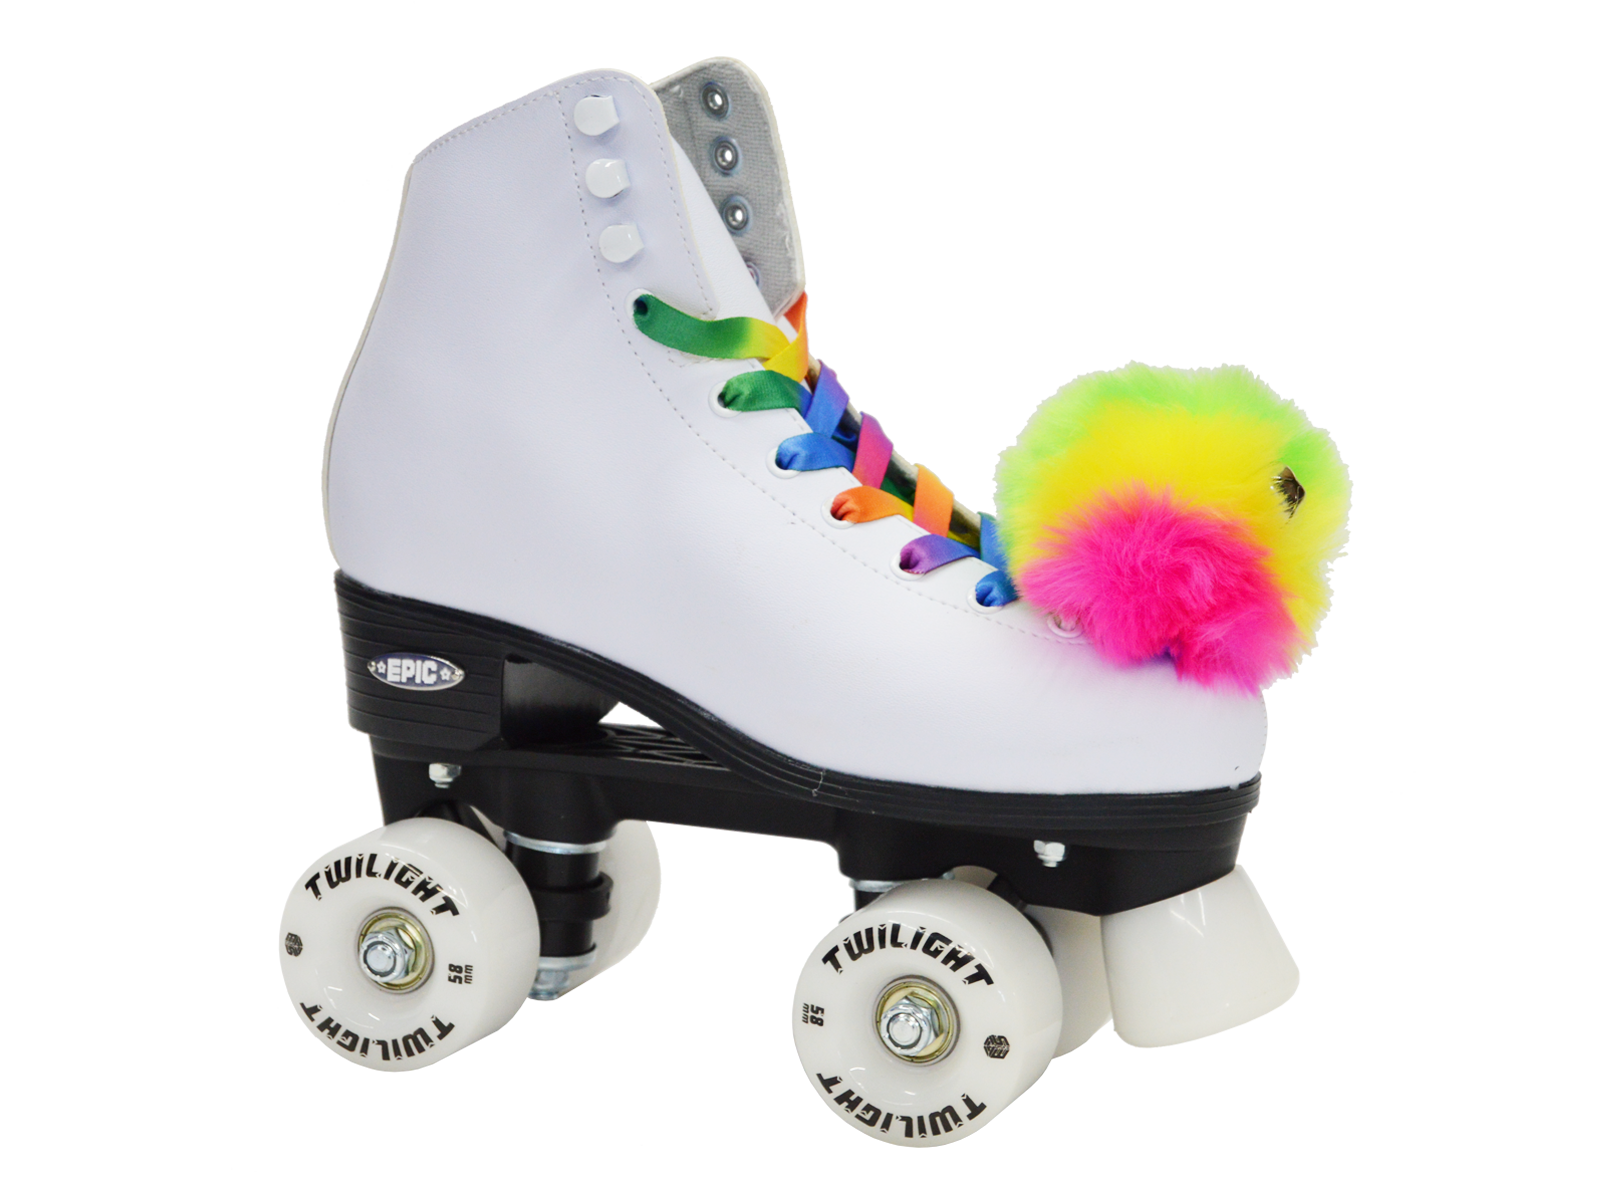 New EPIC Limited Edition Rainbow Spectrum Roller Skate Accessory Bundle! 